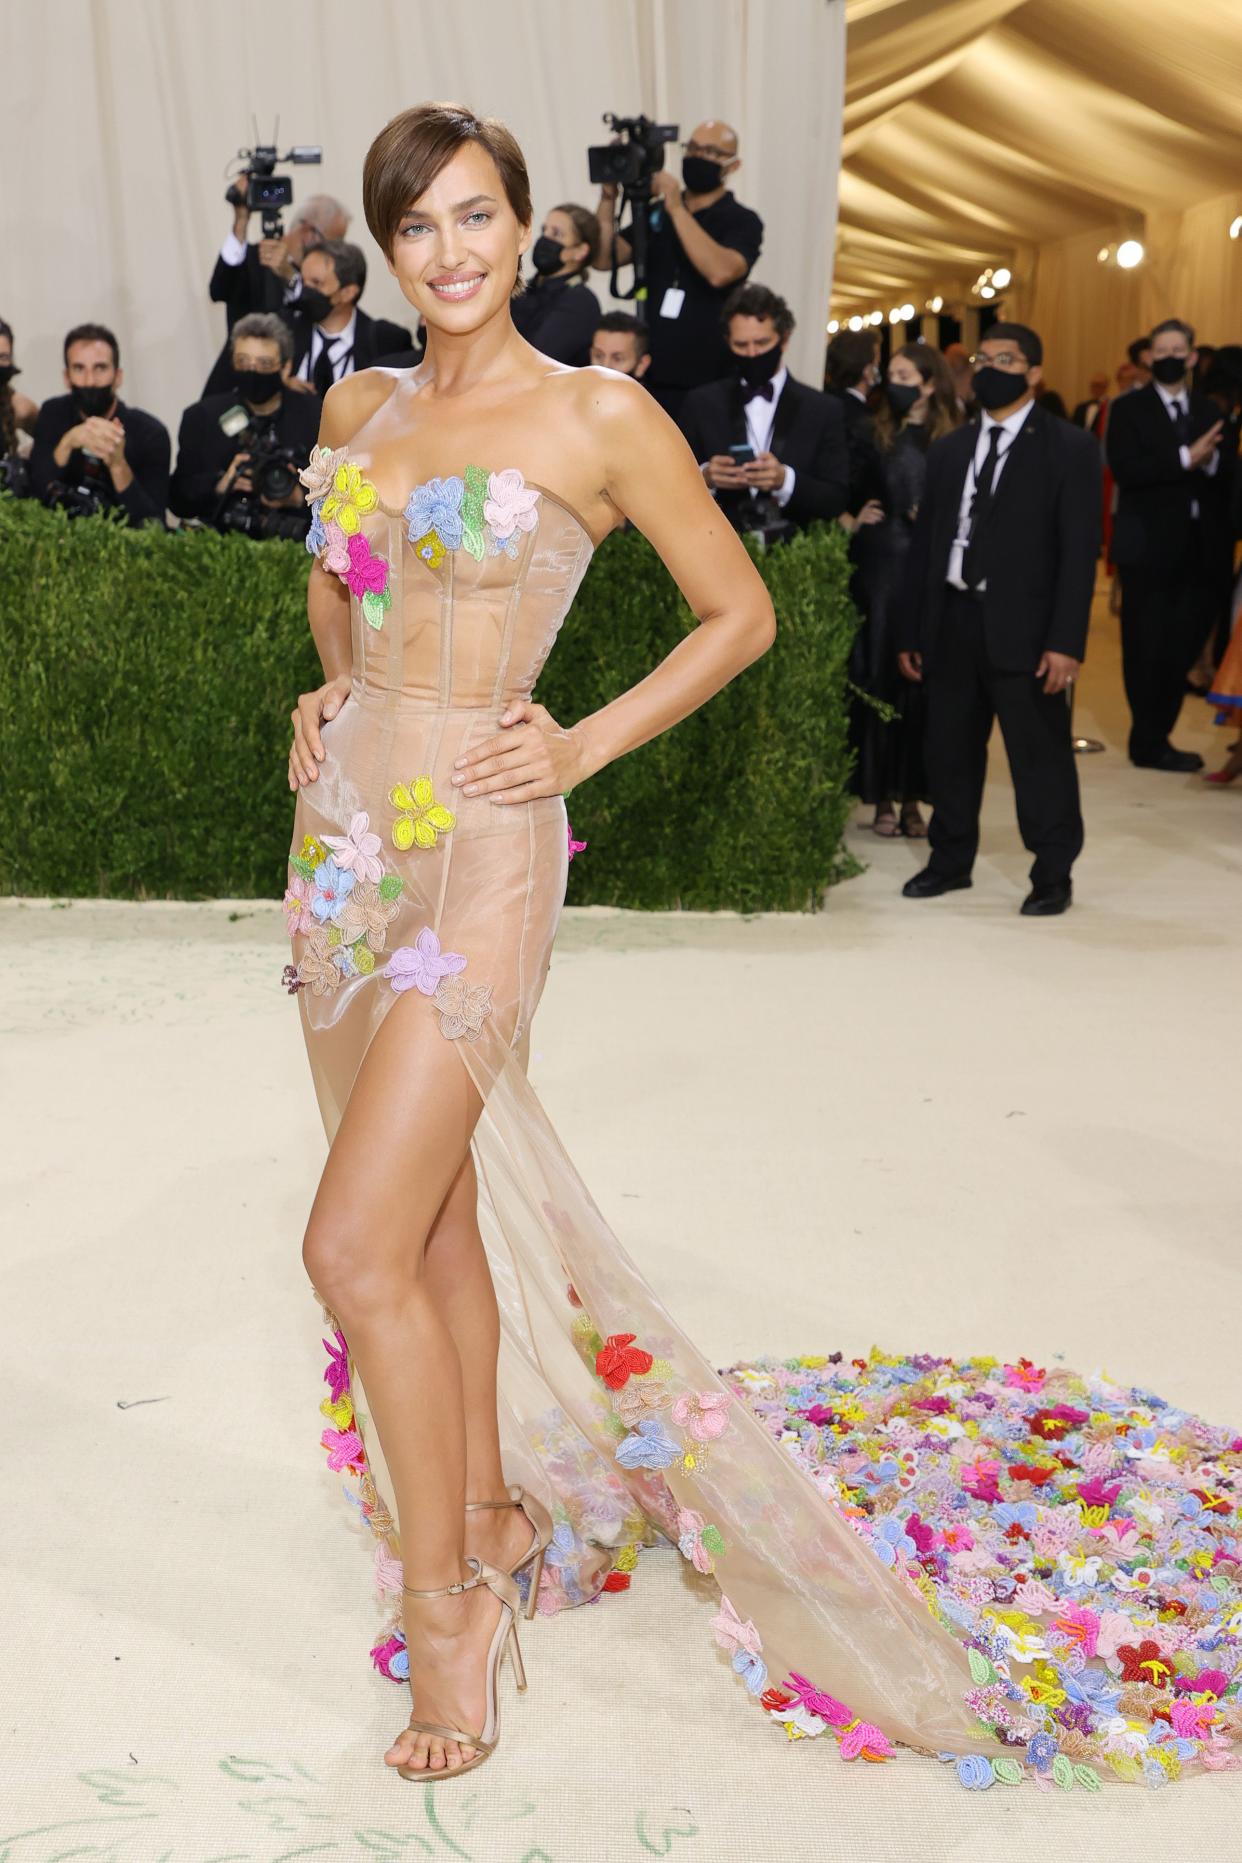 Irina Shayk attends The 2021 Met Gala Celebrating In America: A Lexicon Of Fashion at Metropolitan Museum of Art on Sept. 13, 2021 in New York.